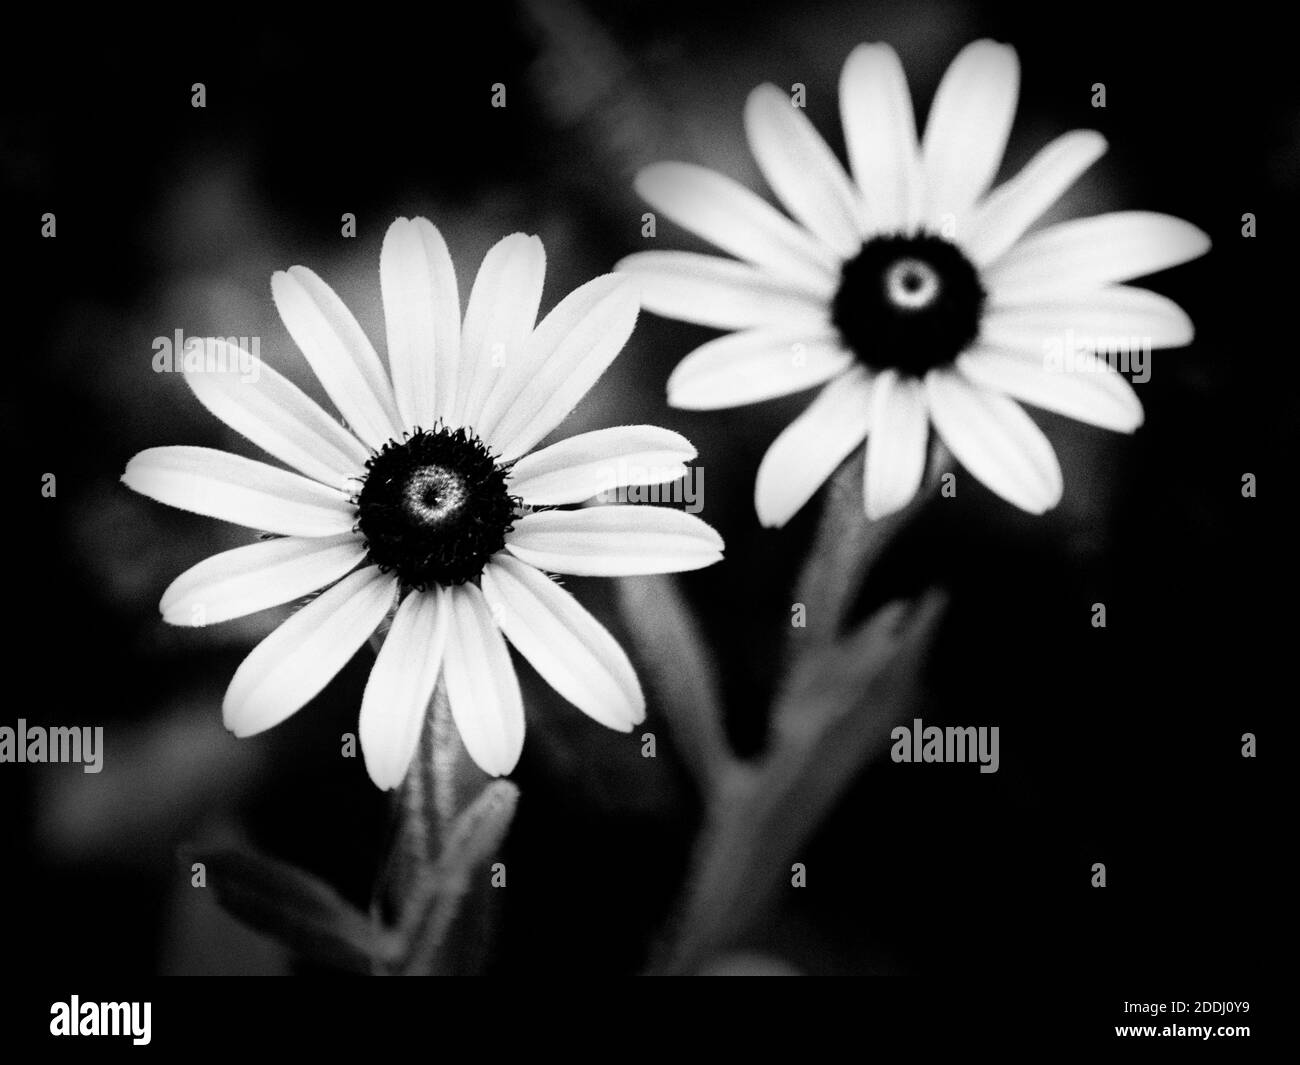 Black And White Flowers Stock Photo